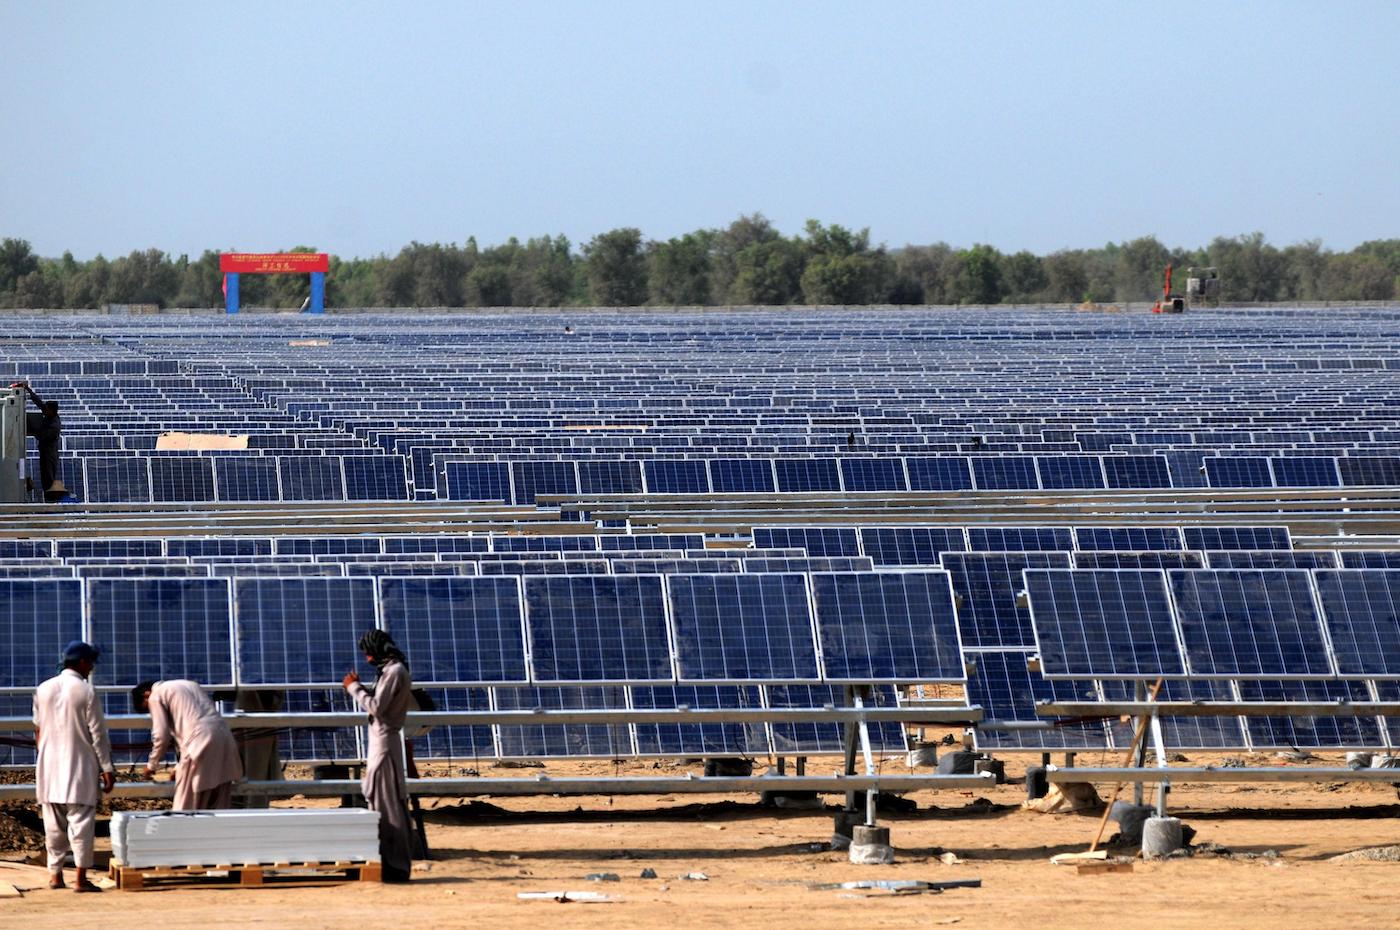 <p>Solar panels are installed for the Zonergy 900 MW project in Bahawalpur, Pakistan, in 2015. The project is part of the China-Pakistan Economic Corridor. (Image: Ahmad Kamal / Alamy)</p>